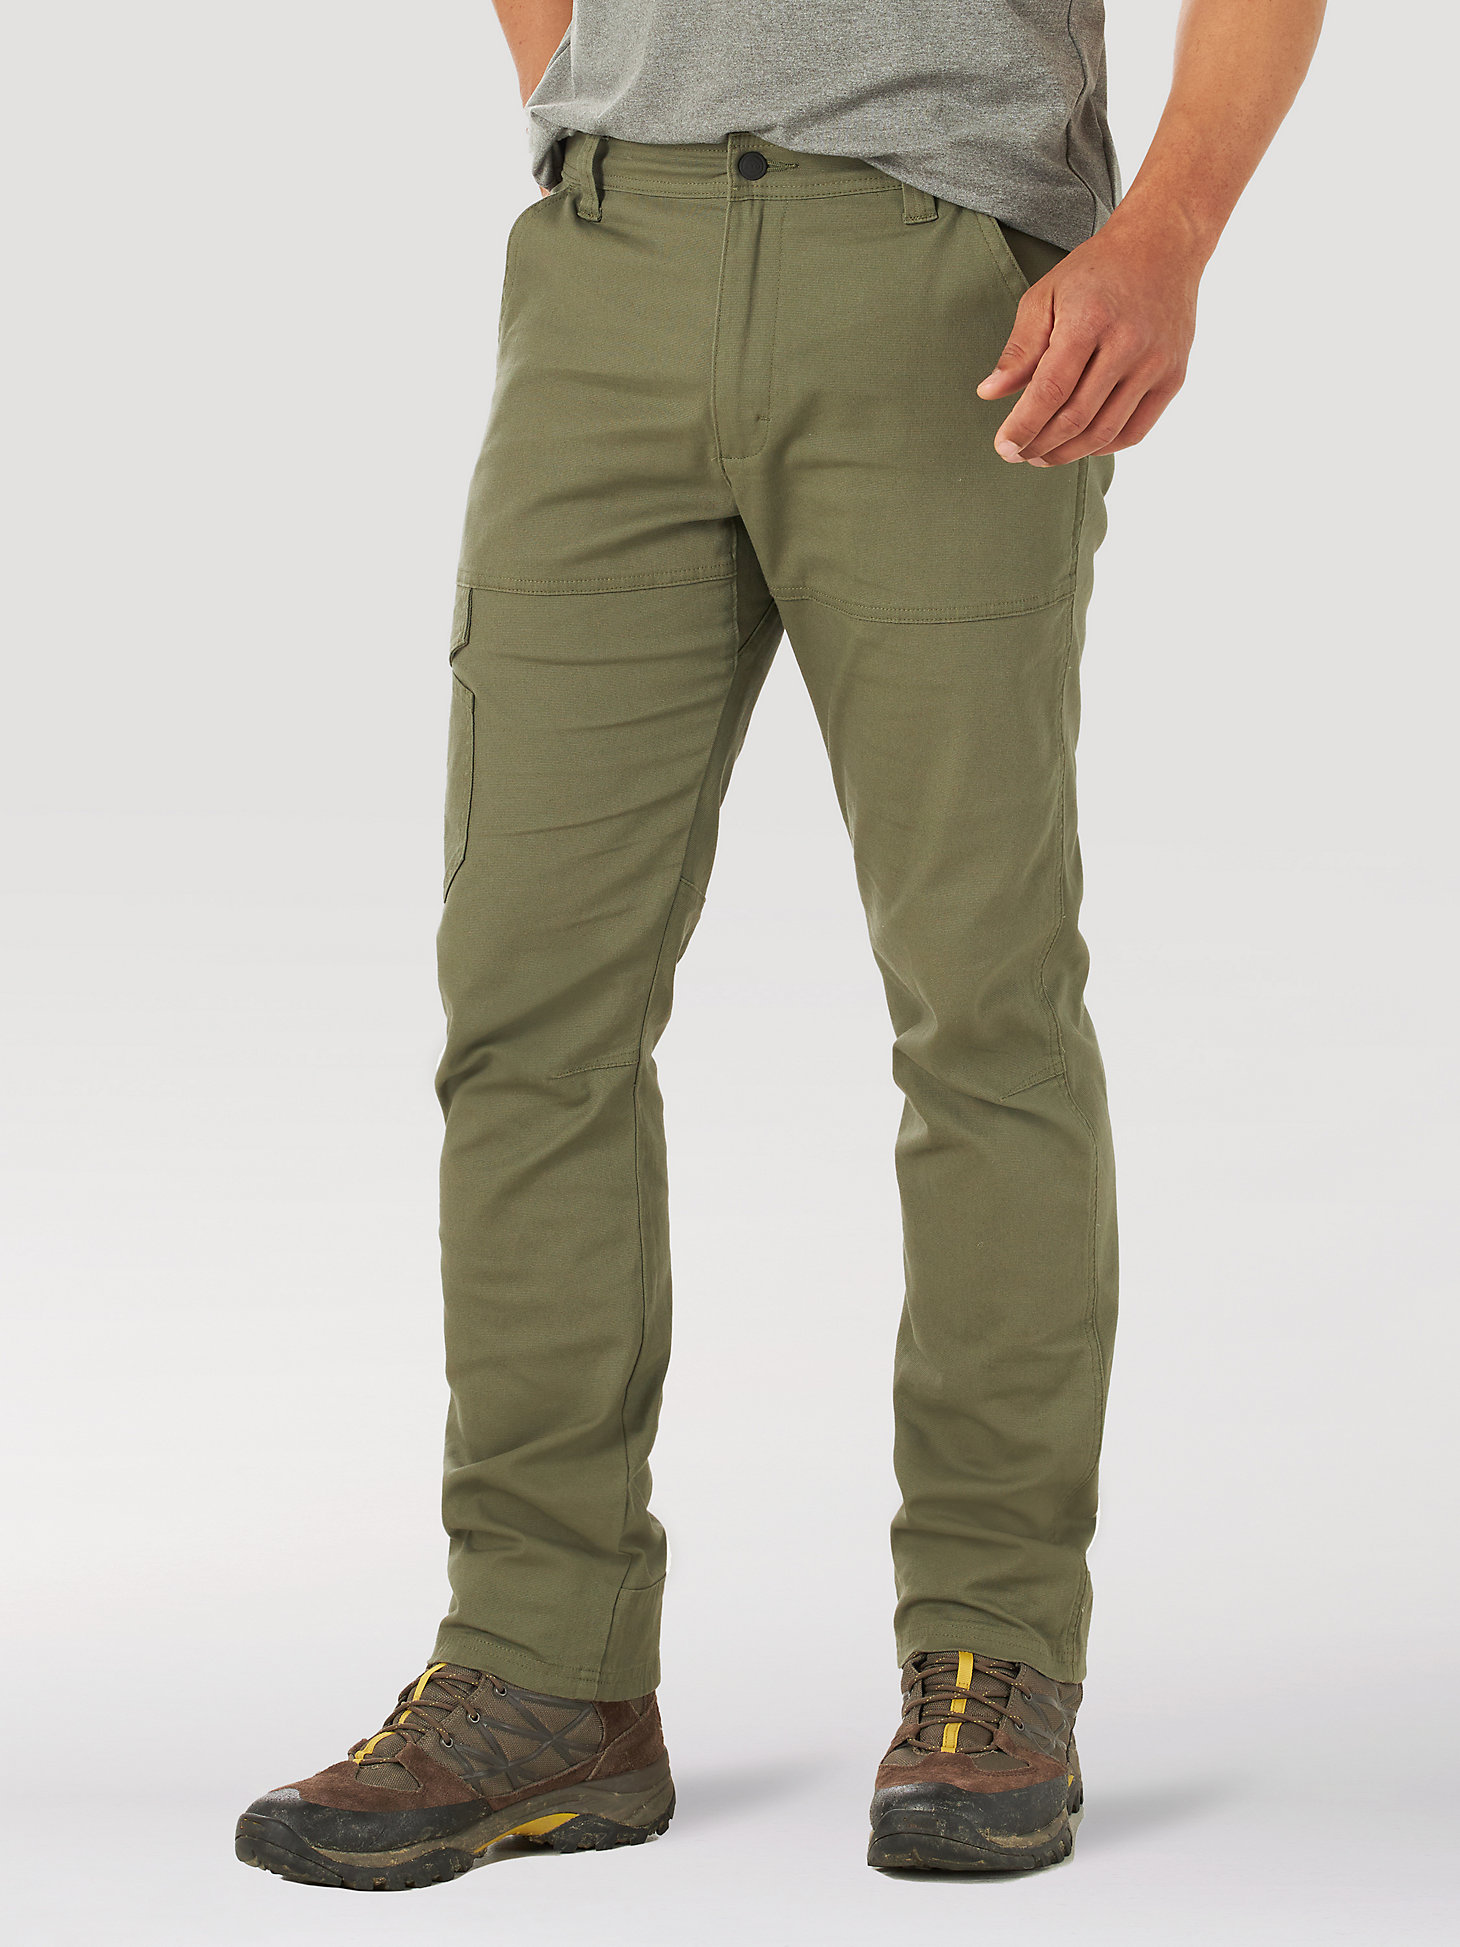 ATG by Wrangler™ Men's Canvas Cargo Pant in Industrial Green main view